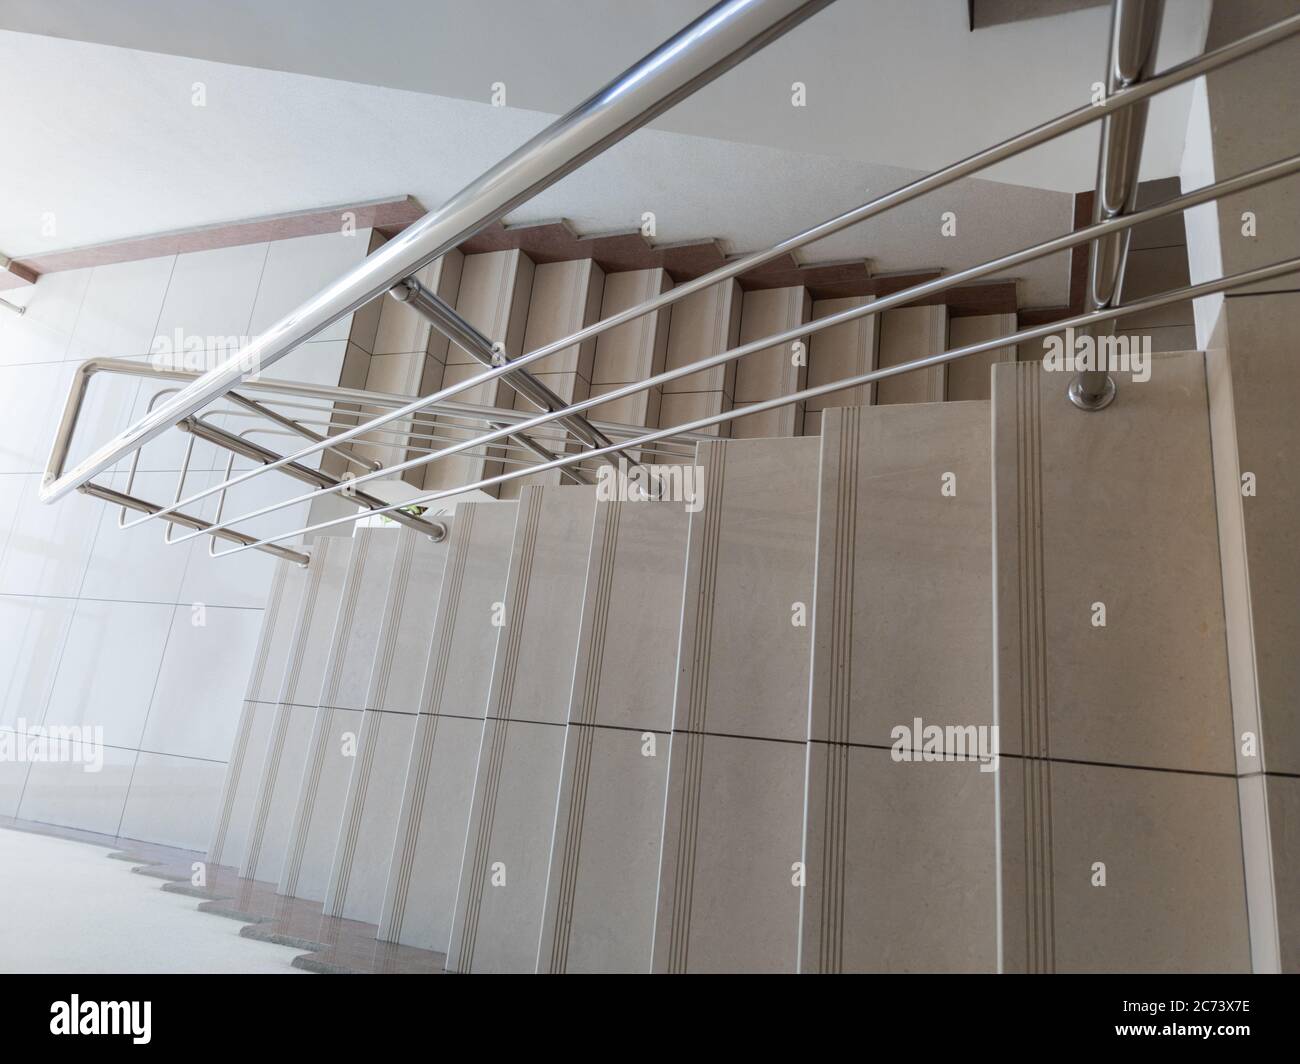 modern design of stanless steel pipes handrail and ceramic tiles staircase in abstract public building Stock Photo